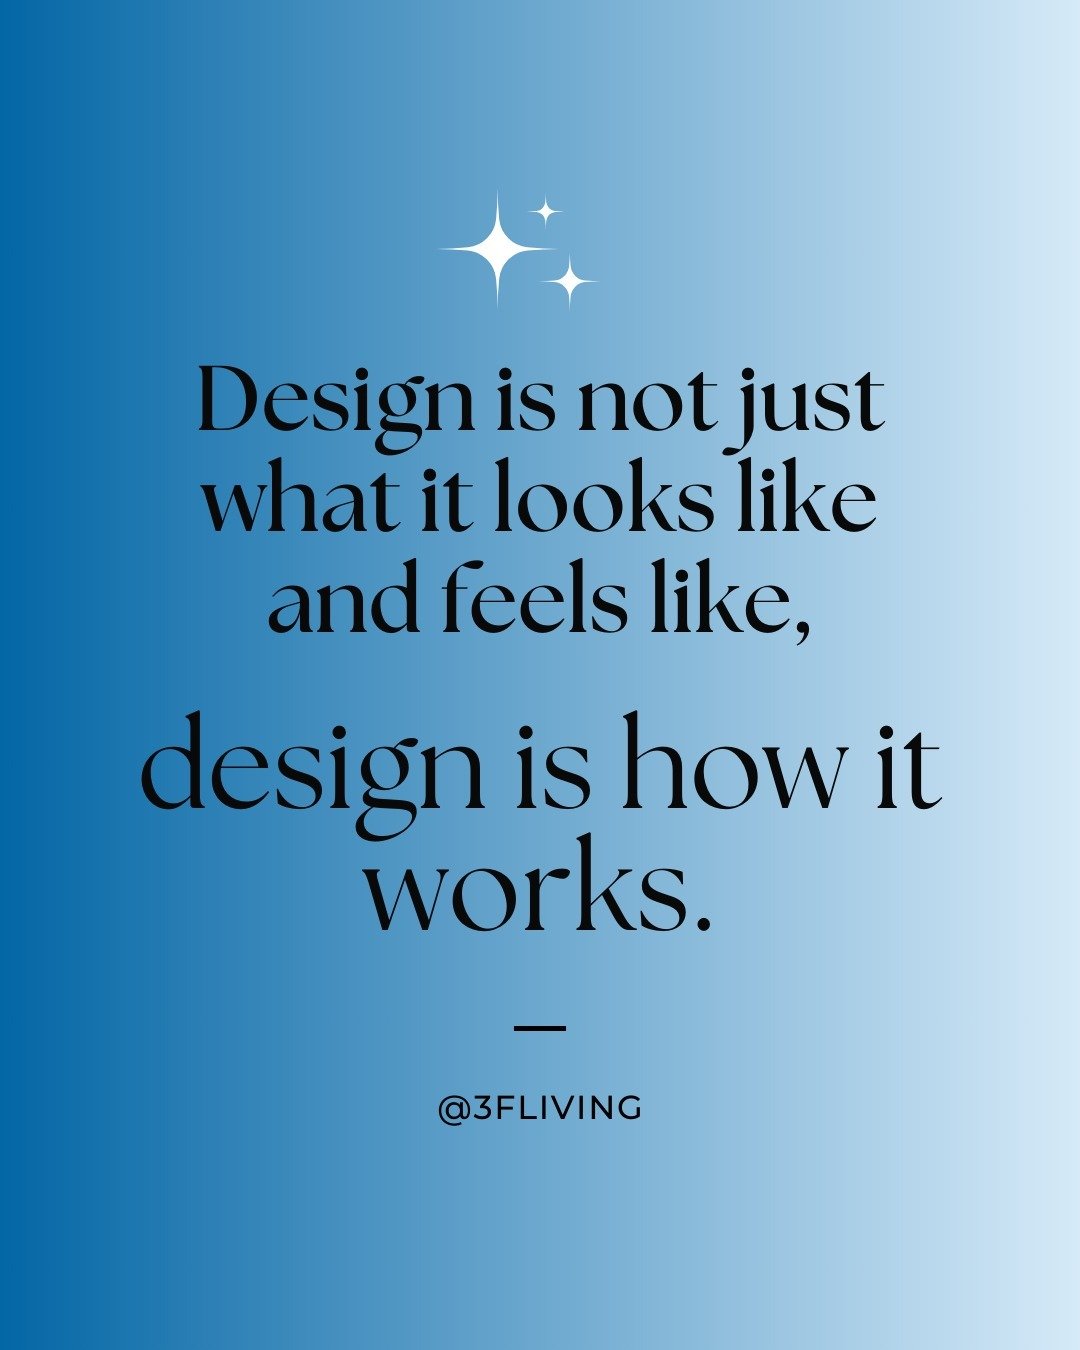 Quote Of The Week - &quot;Design is not just what it looks like and feels like, design is how it works.&quot;

#3flivingnyc #architecturenyc #interiordesignnyc #quoteoftheweek #wordsofwisdom #wordstoliveby #apartmentdesign #apartmentinterior #apartme